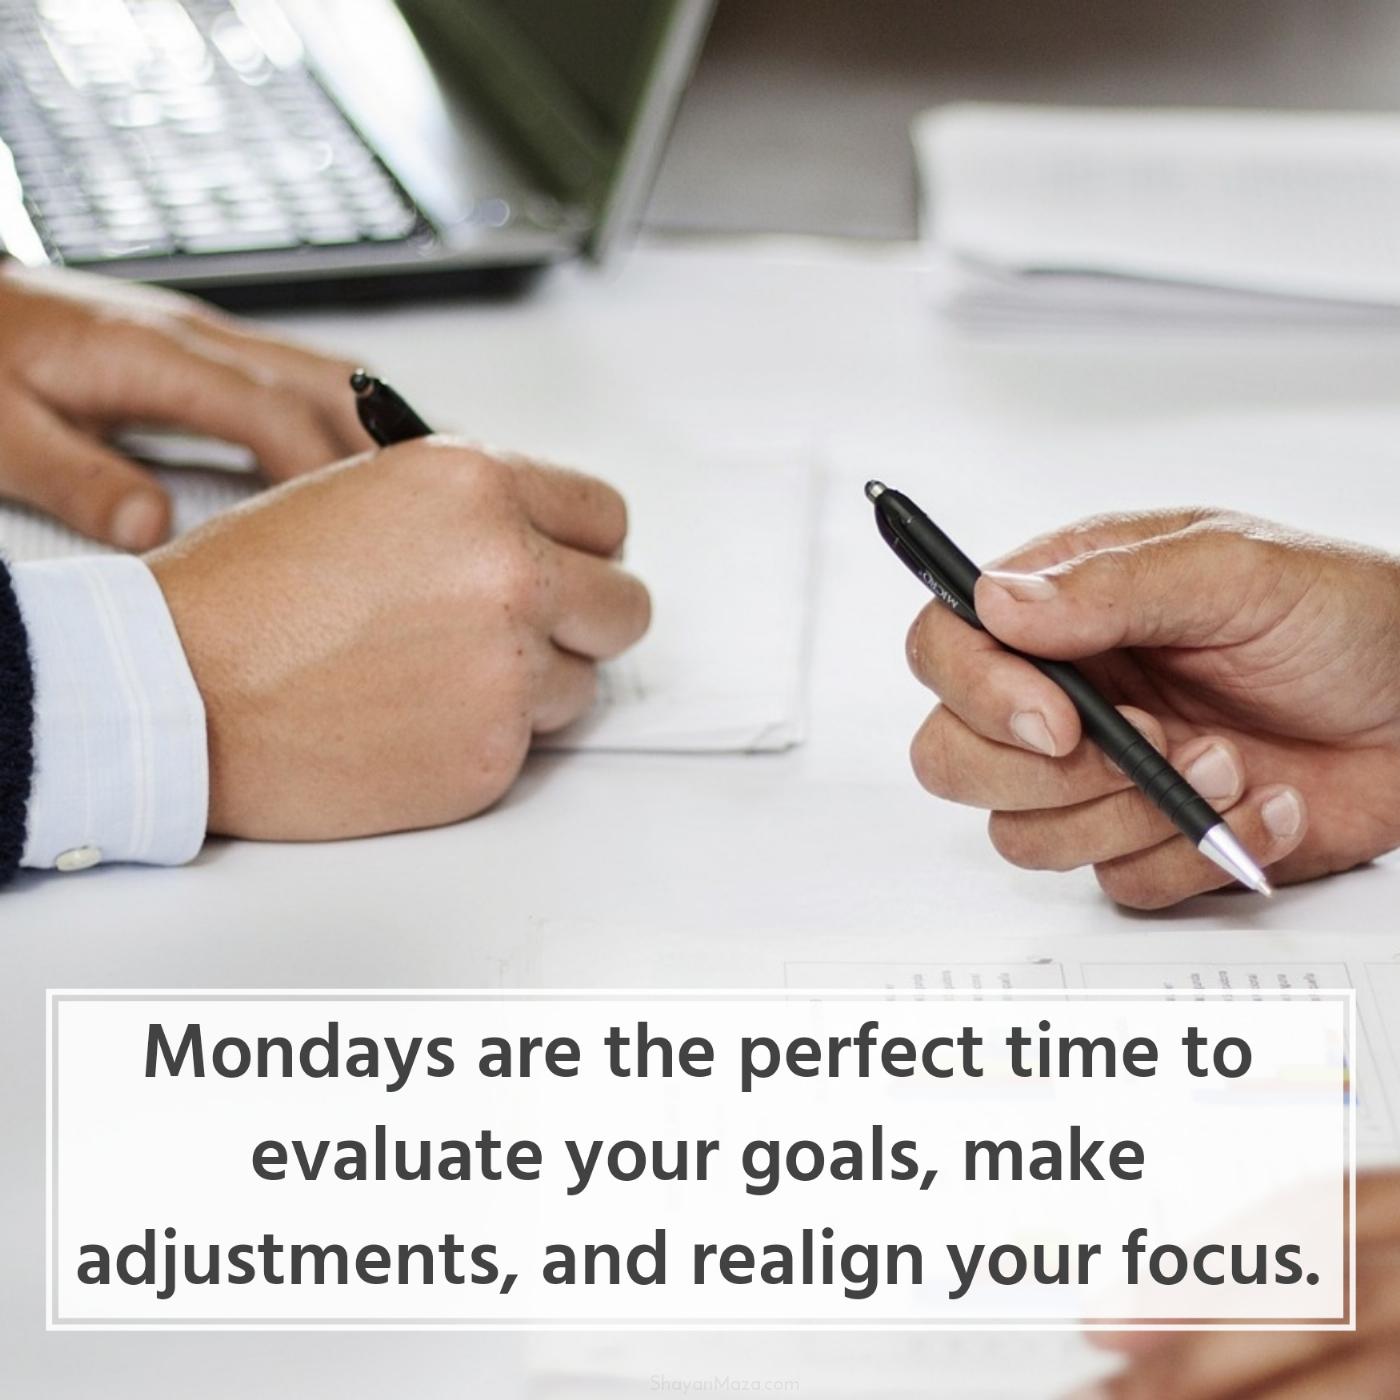 Mondays are the perfect time to evaluate your goals